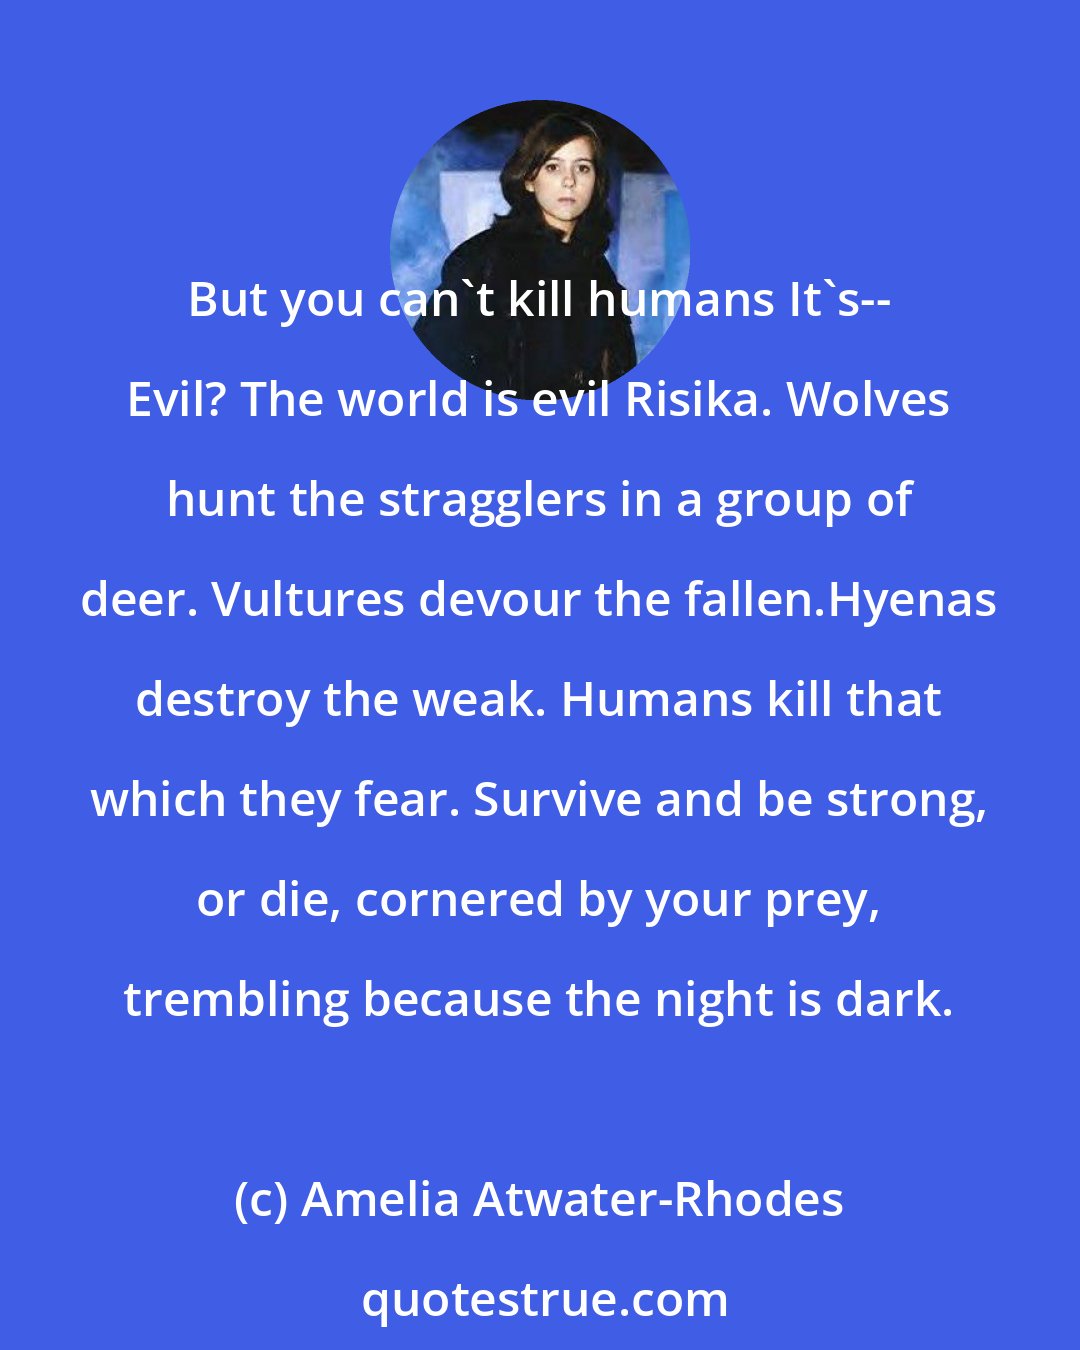 Amelia Atwater-Rhodes: But you can't kill humans It's-- Evil? The world is evil Risika. Wolves hunt the stragglers in a group of deer. Vultures devour the fallen.Hyenas destroy the weak. Humans kill that which they fear. Survive and be strong, or die, cornered by your prey, trembling because the night is dark.